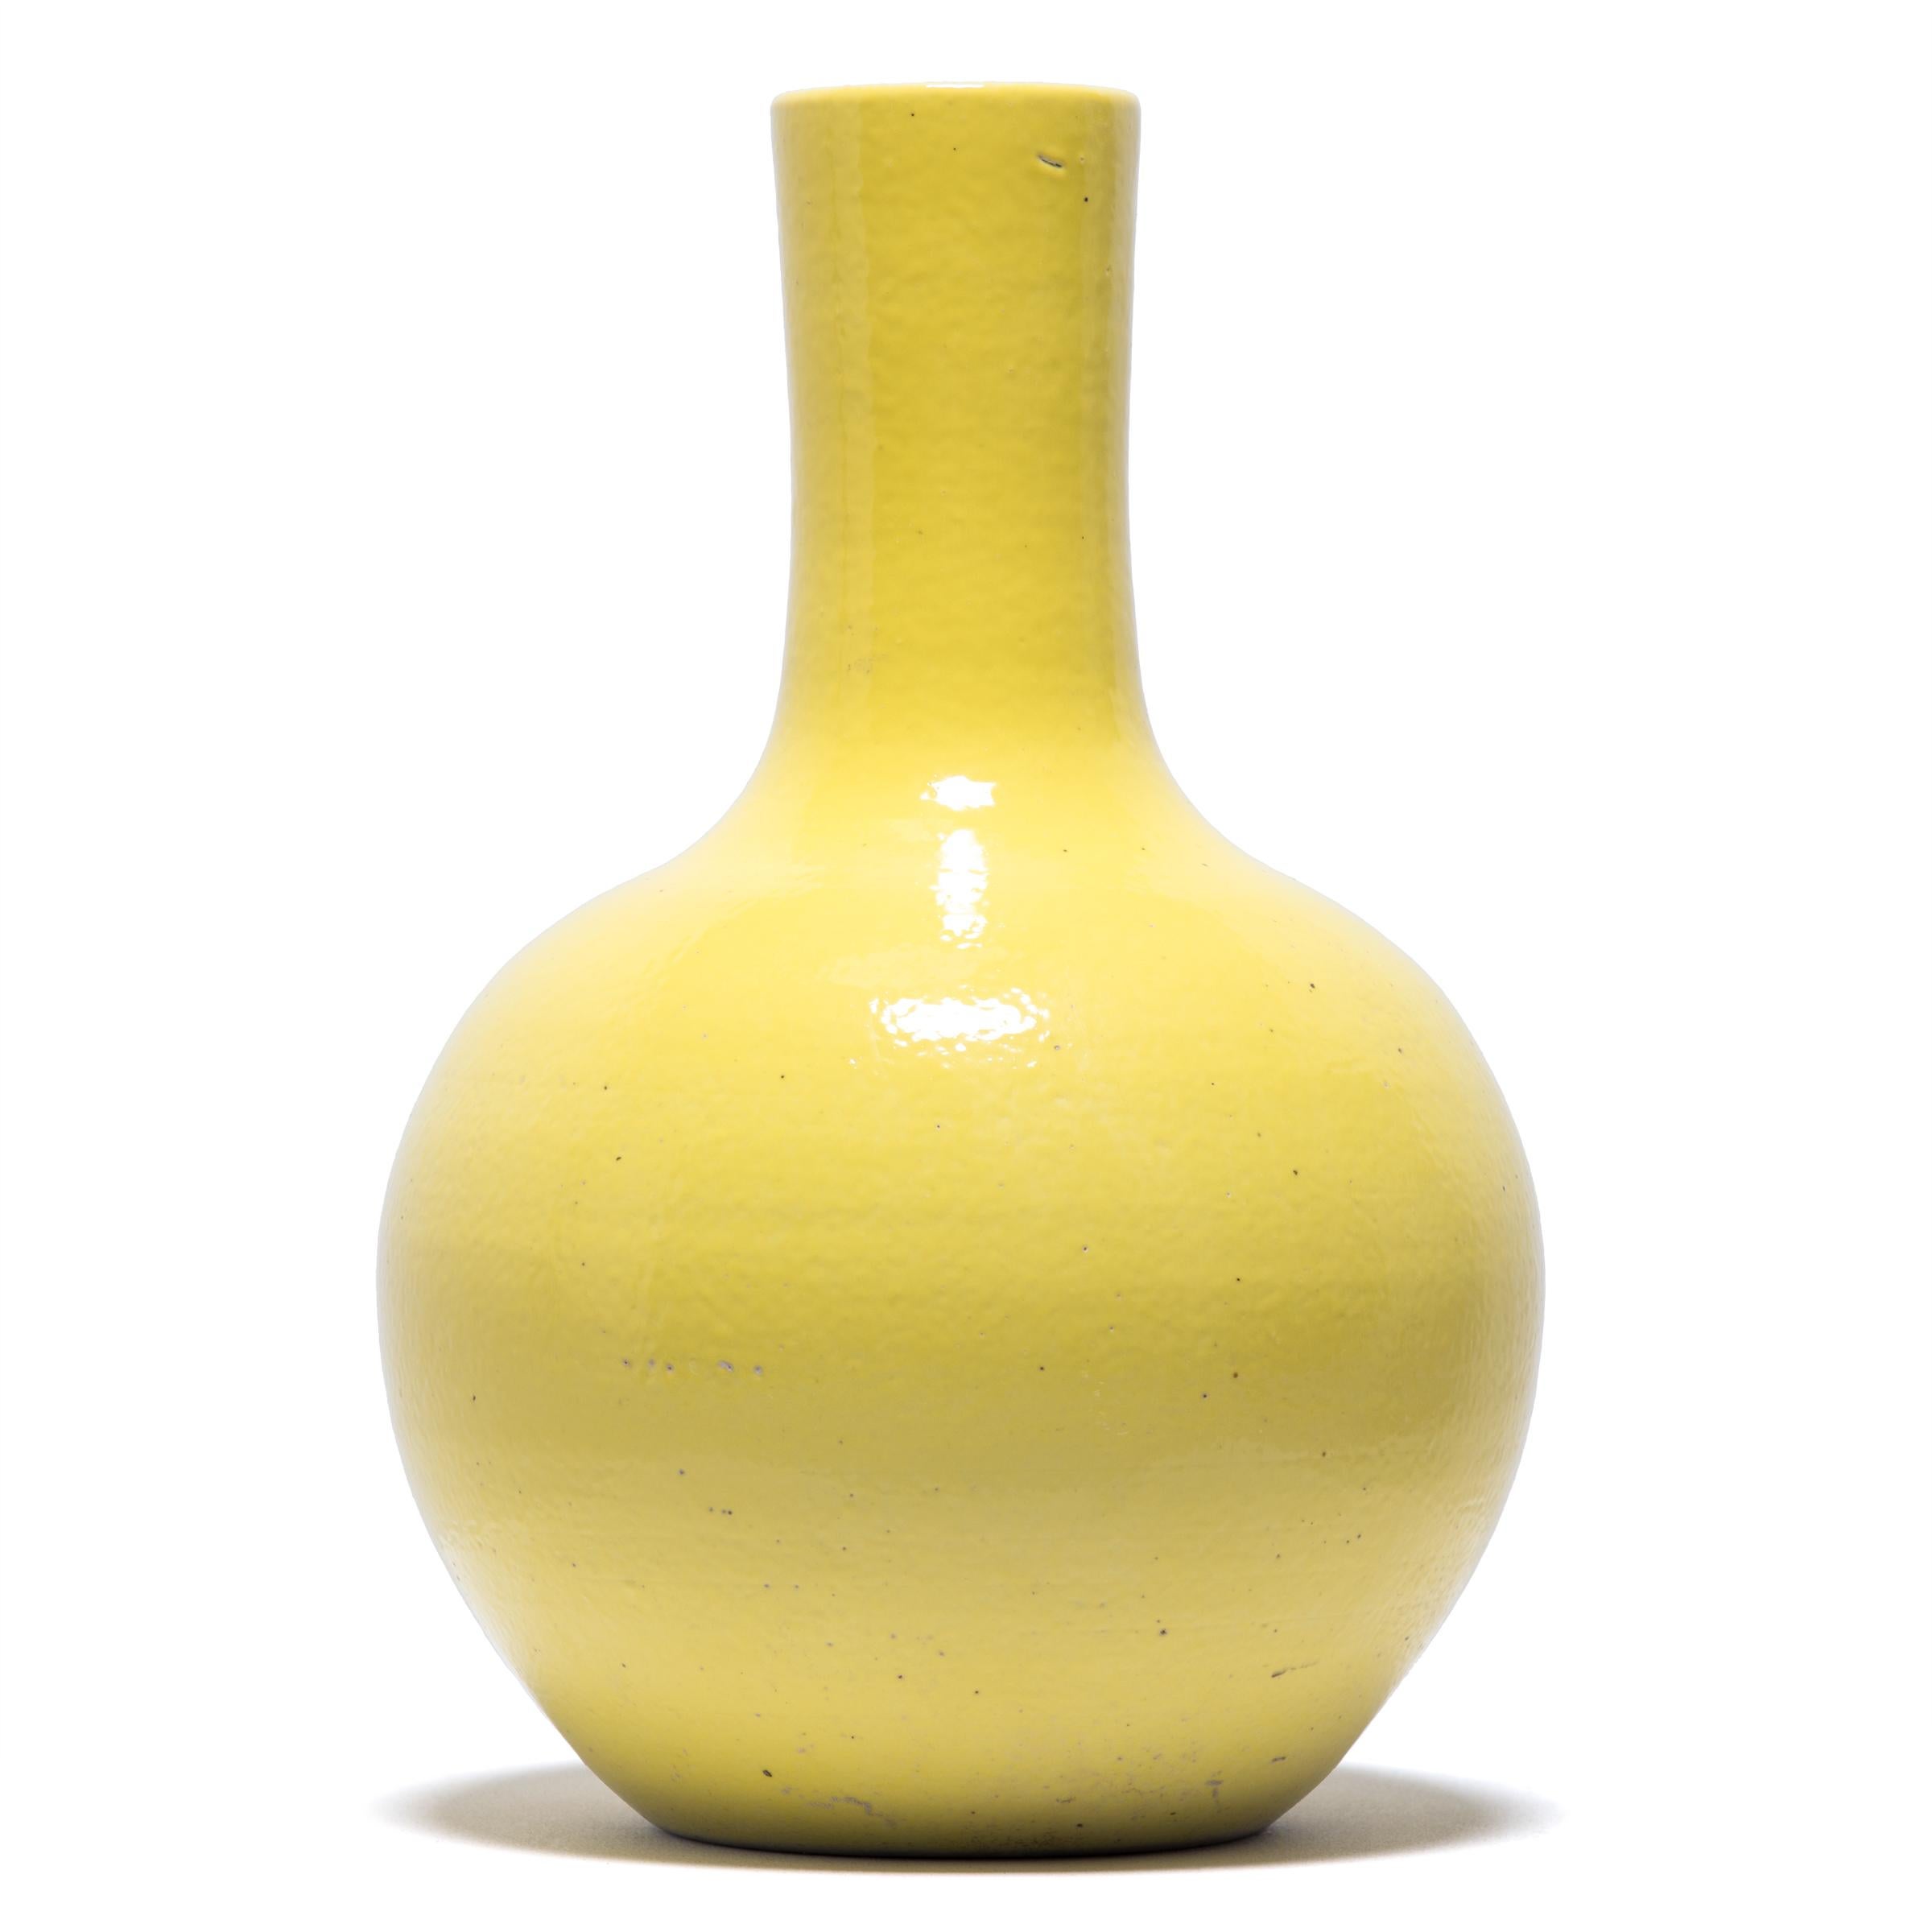 Drawing on a long Chinese tradition of monochrome ceramics, this tall gooseneck vase is glazed in vibrant citron-yellow glaze. The vase features a rounded, globular body and a narrow cylindrical neck, a classic form known as 'tianqiuping' or